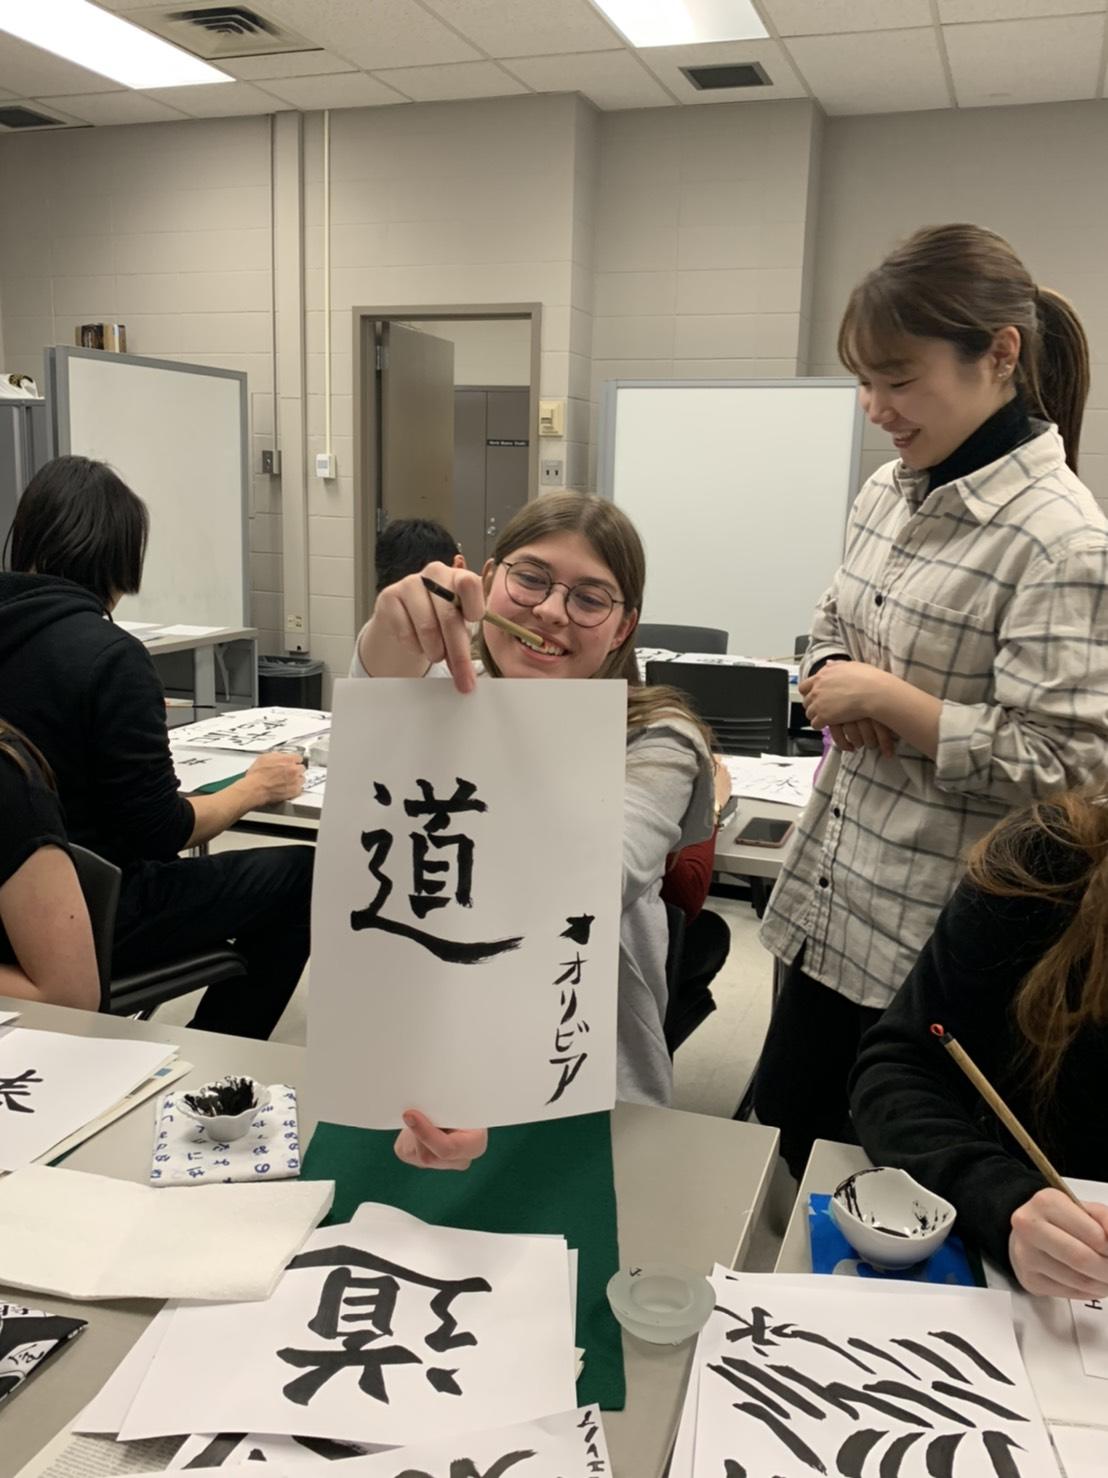 Student proudly displays calligraphy work